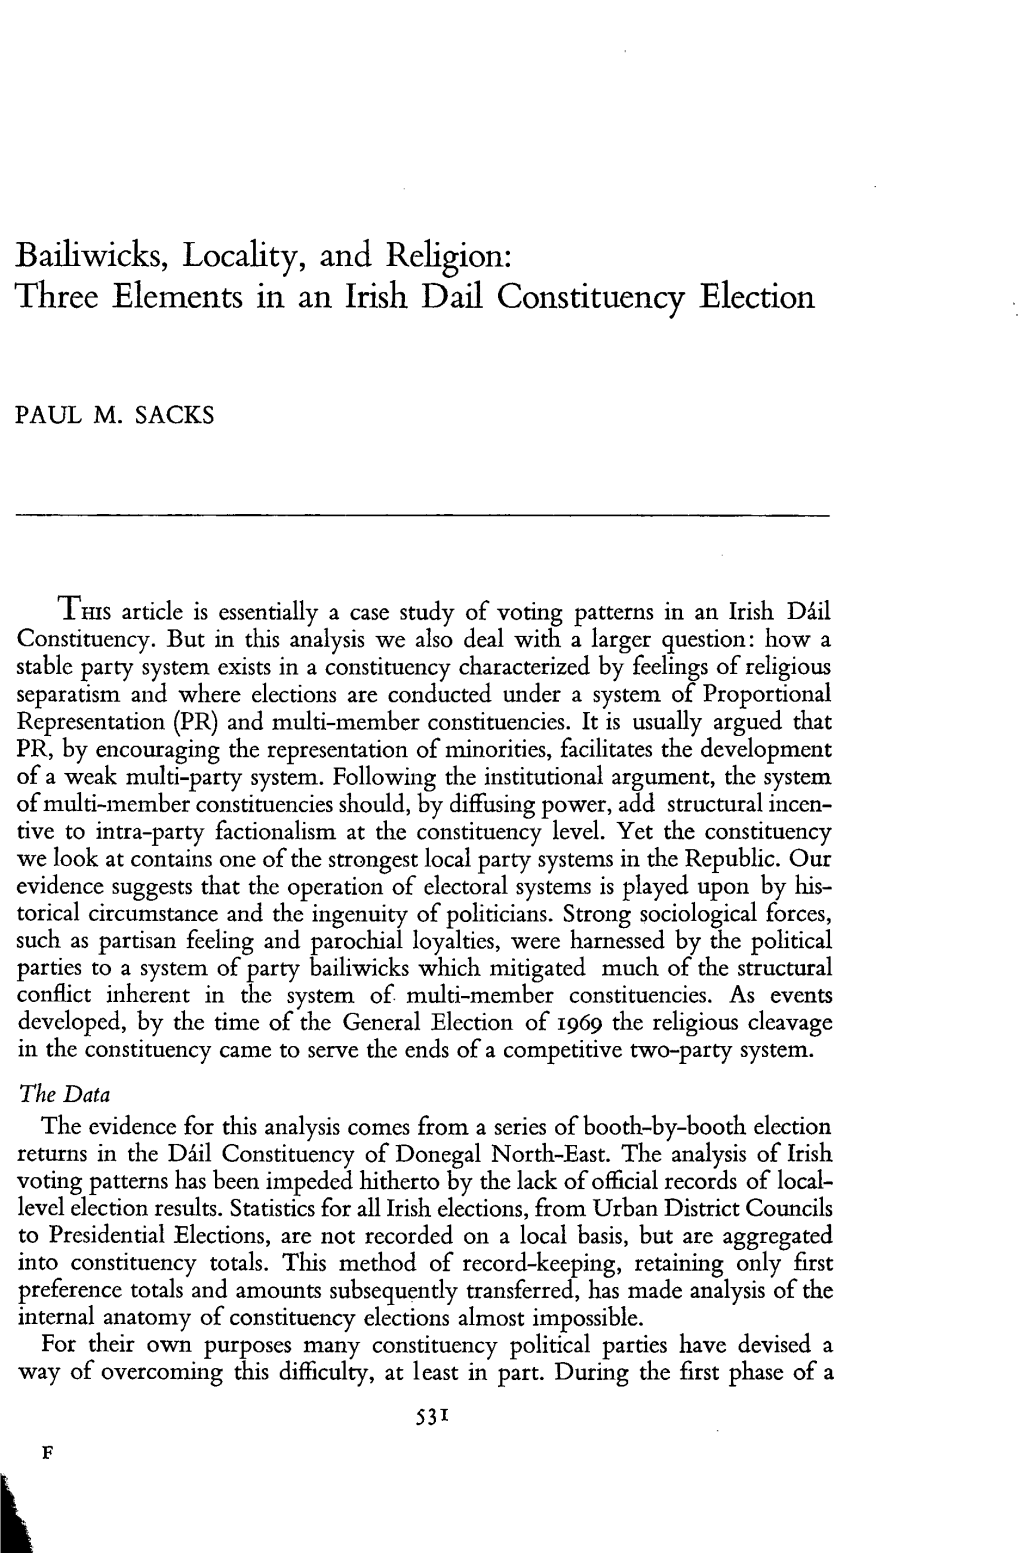 Bailiwicks, Locality, and Religion: Three Elements in an Irish Dail Constituency Election